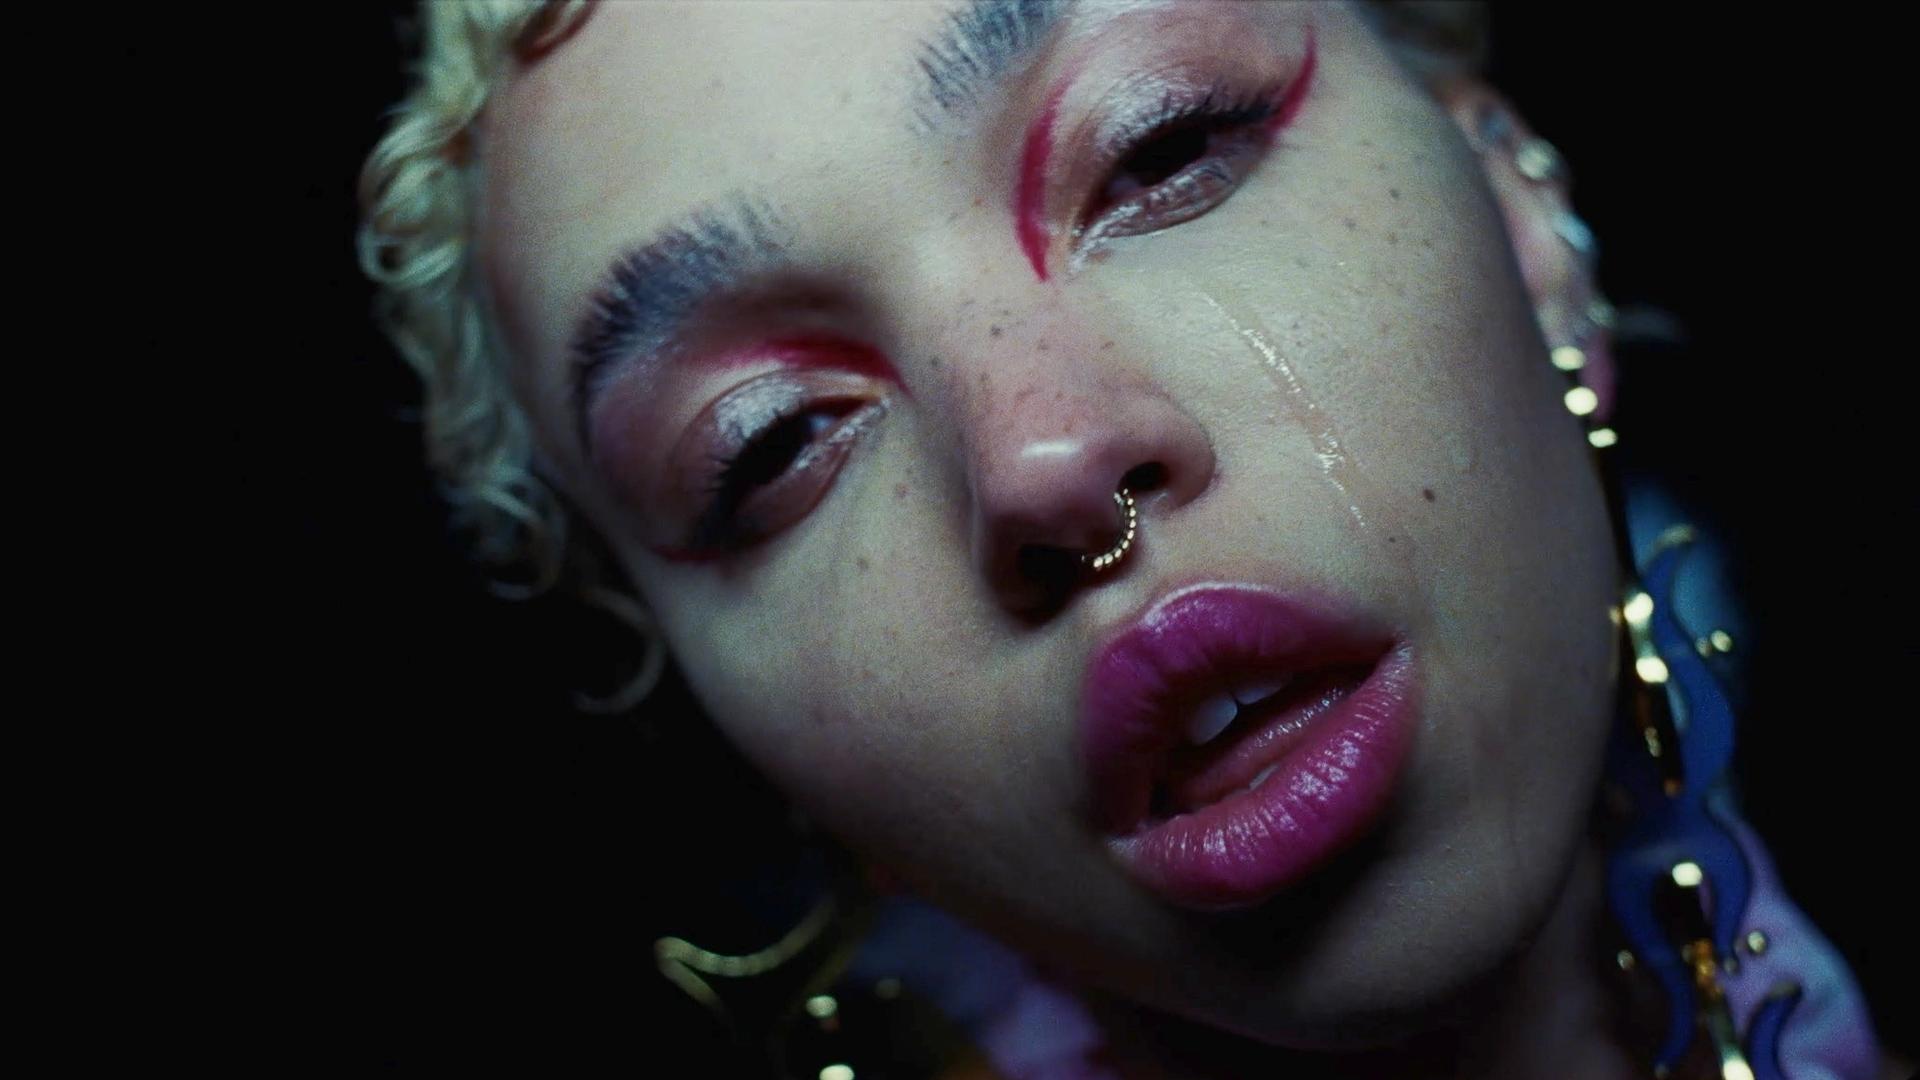 fka-twigs-tears-in-the-club poster image